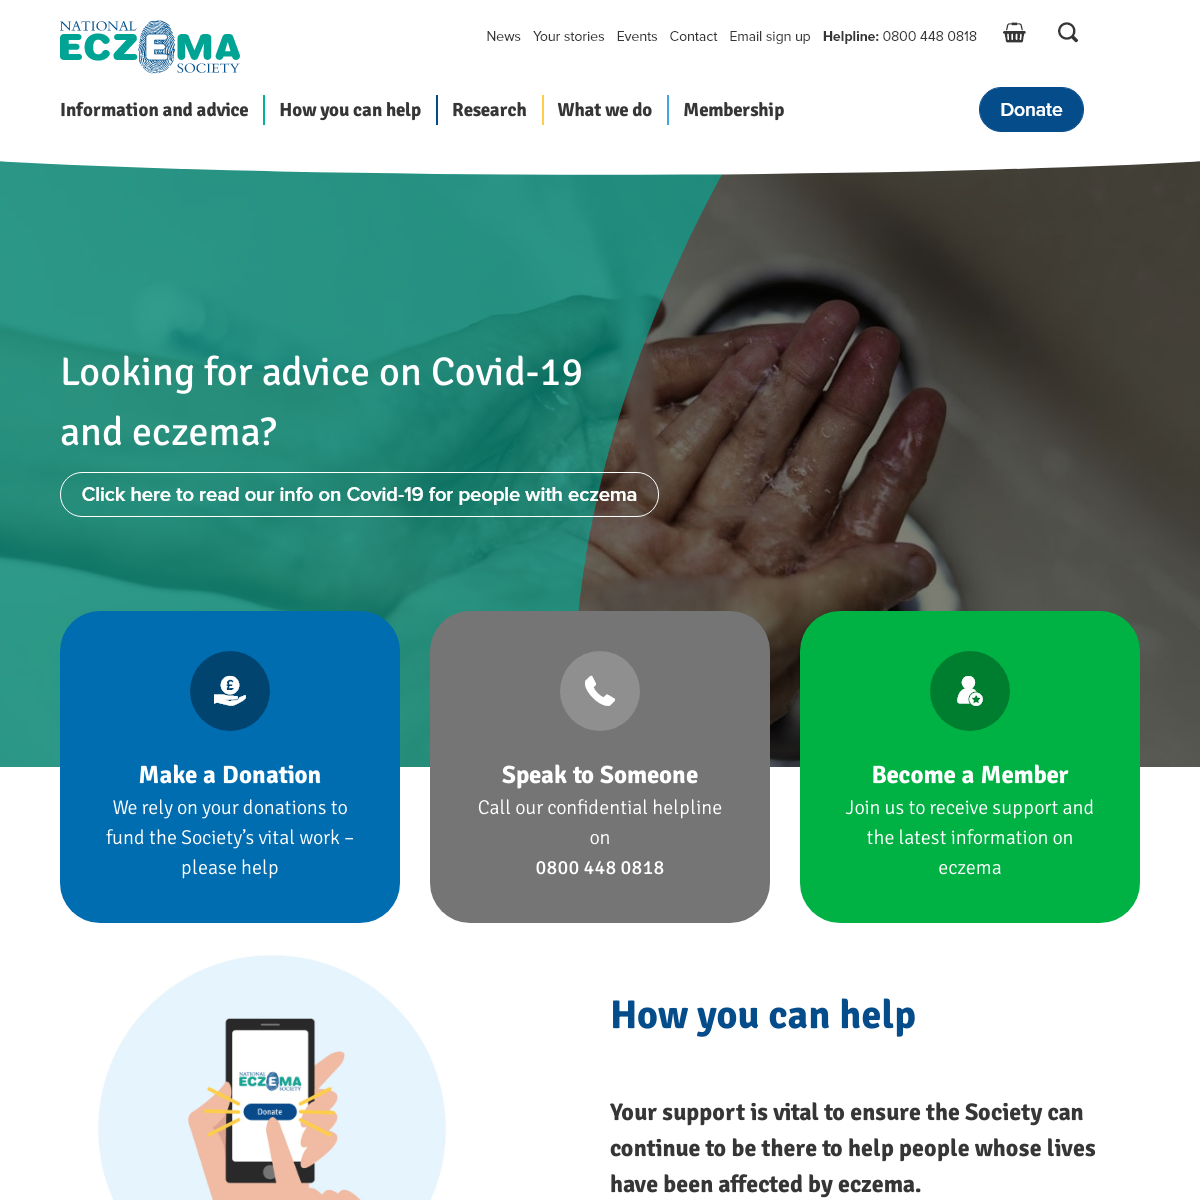 A complete backup of eczema.org